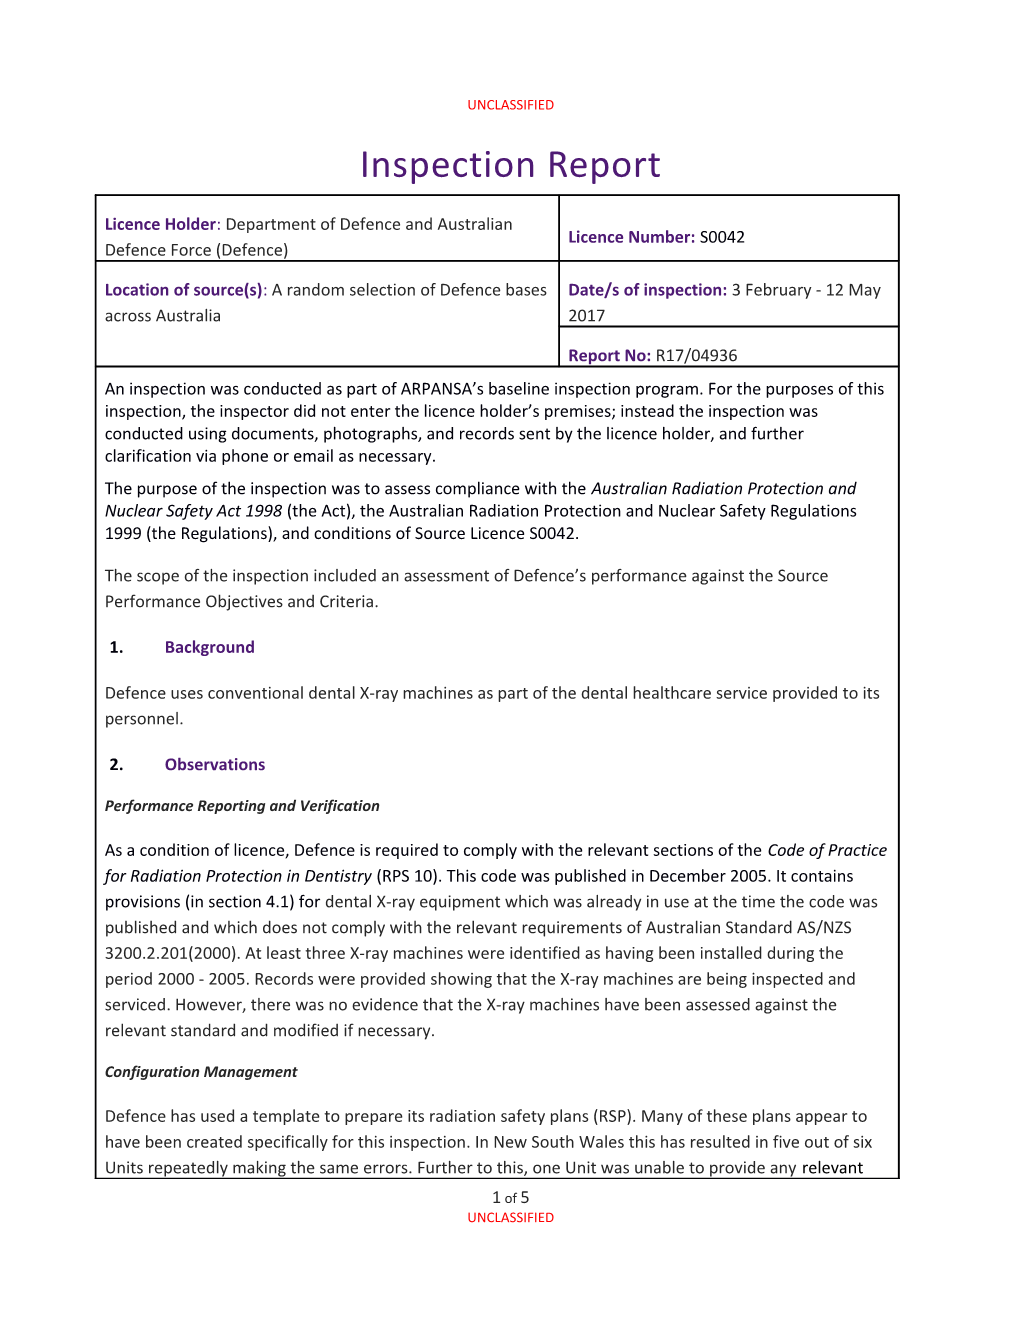 Inspection Report: Department of Defence and Australian Defence Force - Various